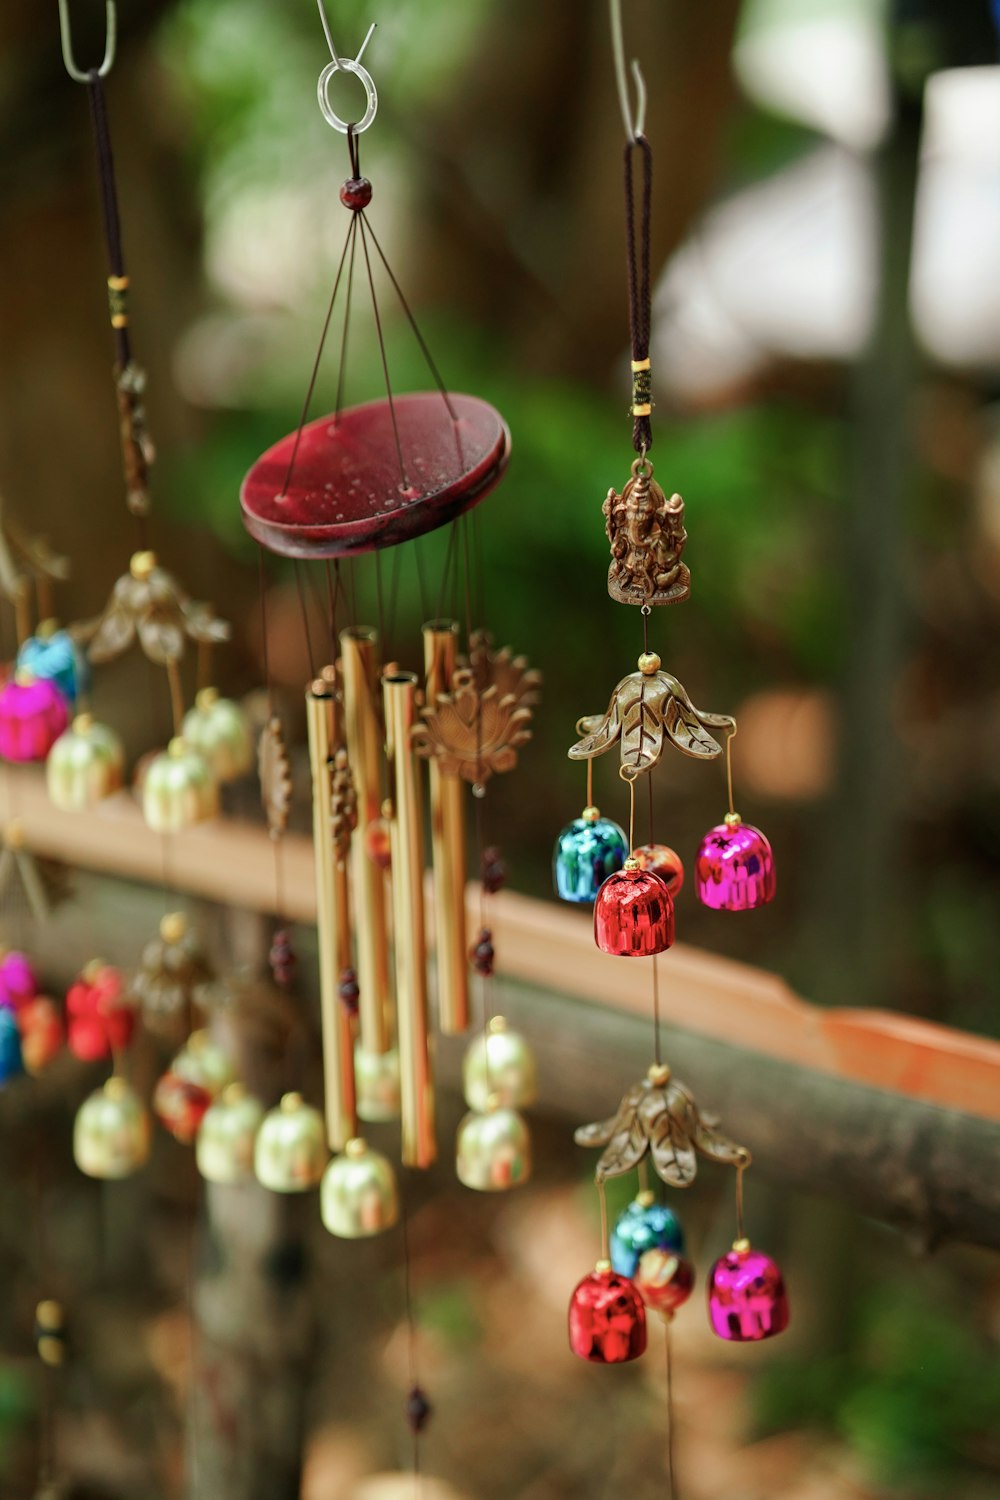 a wind chime hanging from a tree